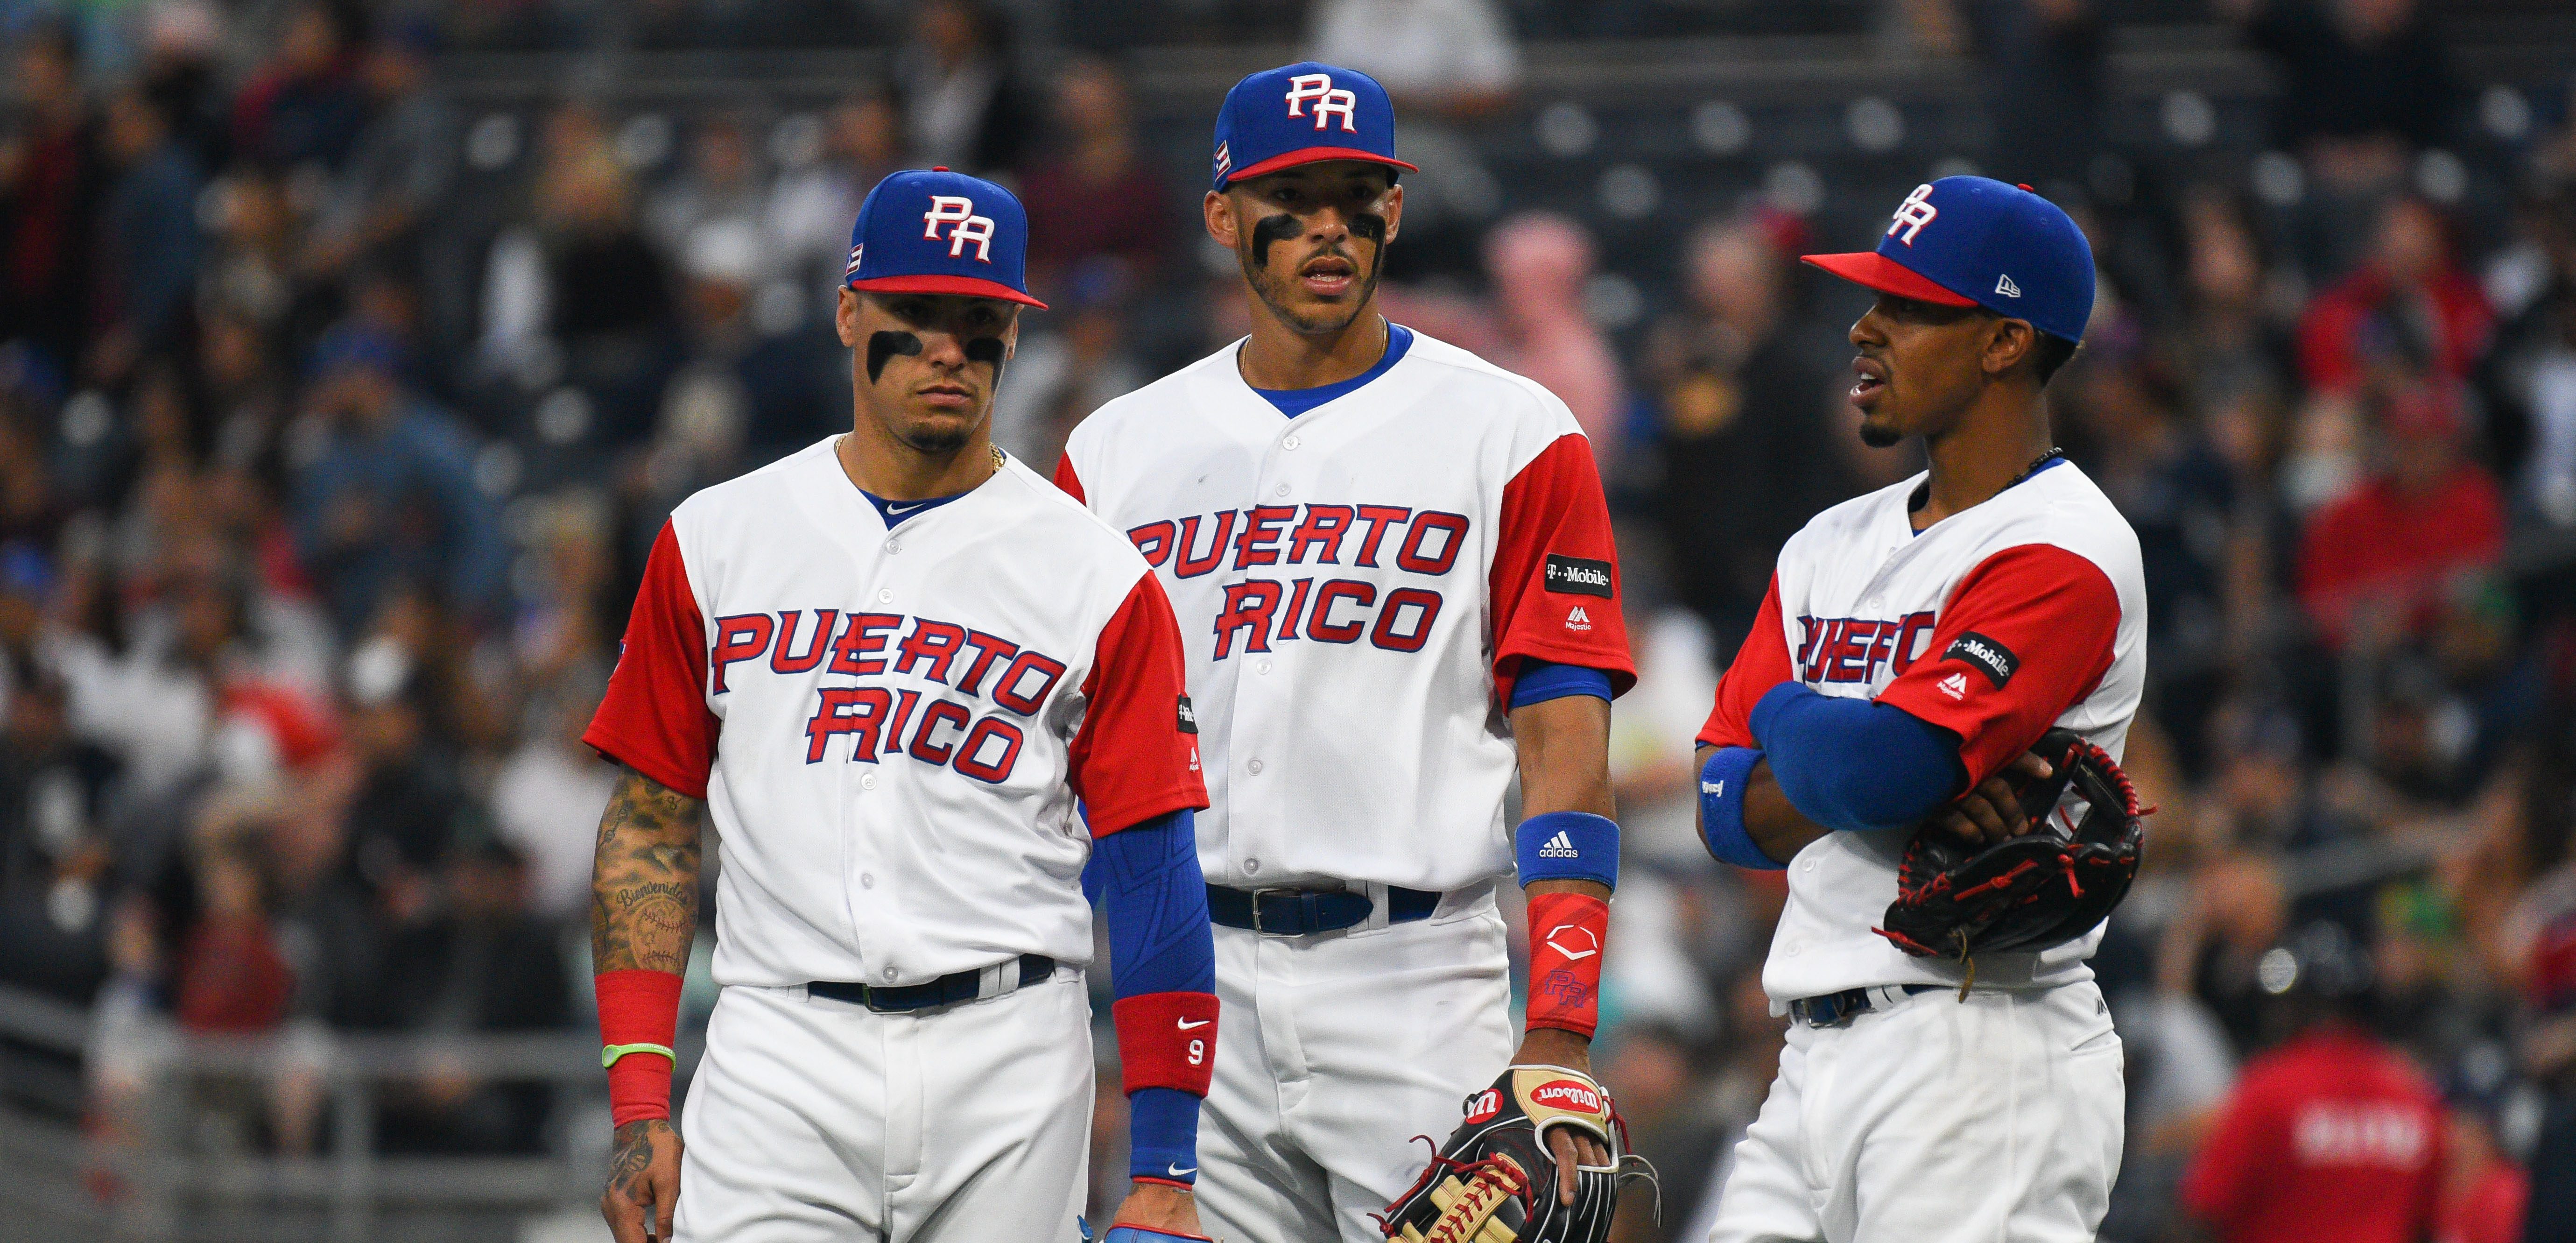 Baseball leaders in Puerto Rico have historic meeting, discuss